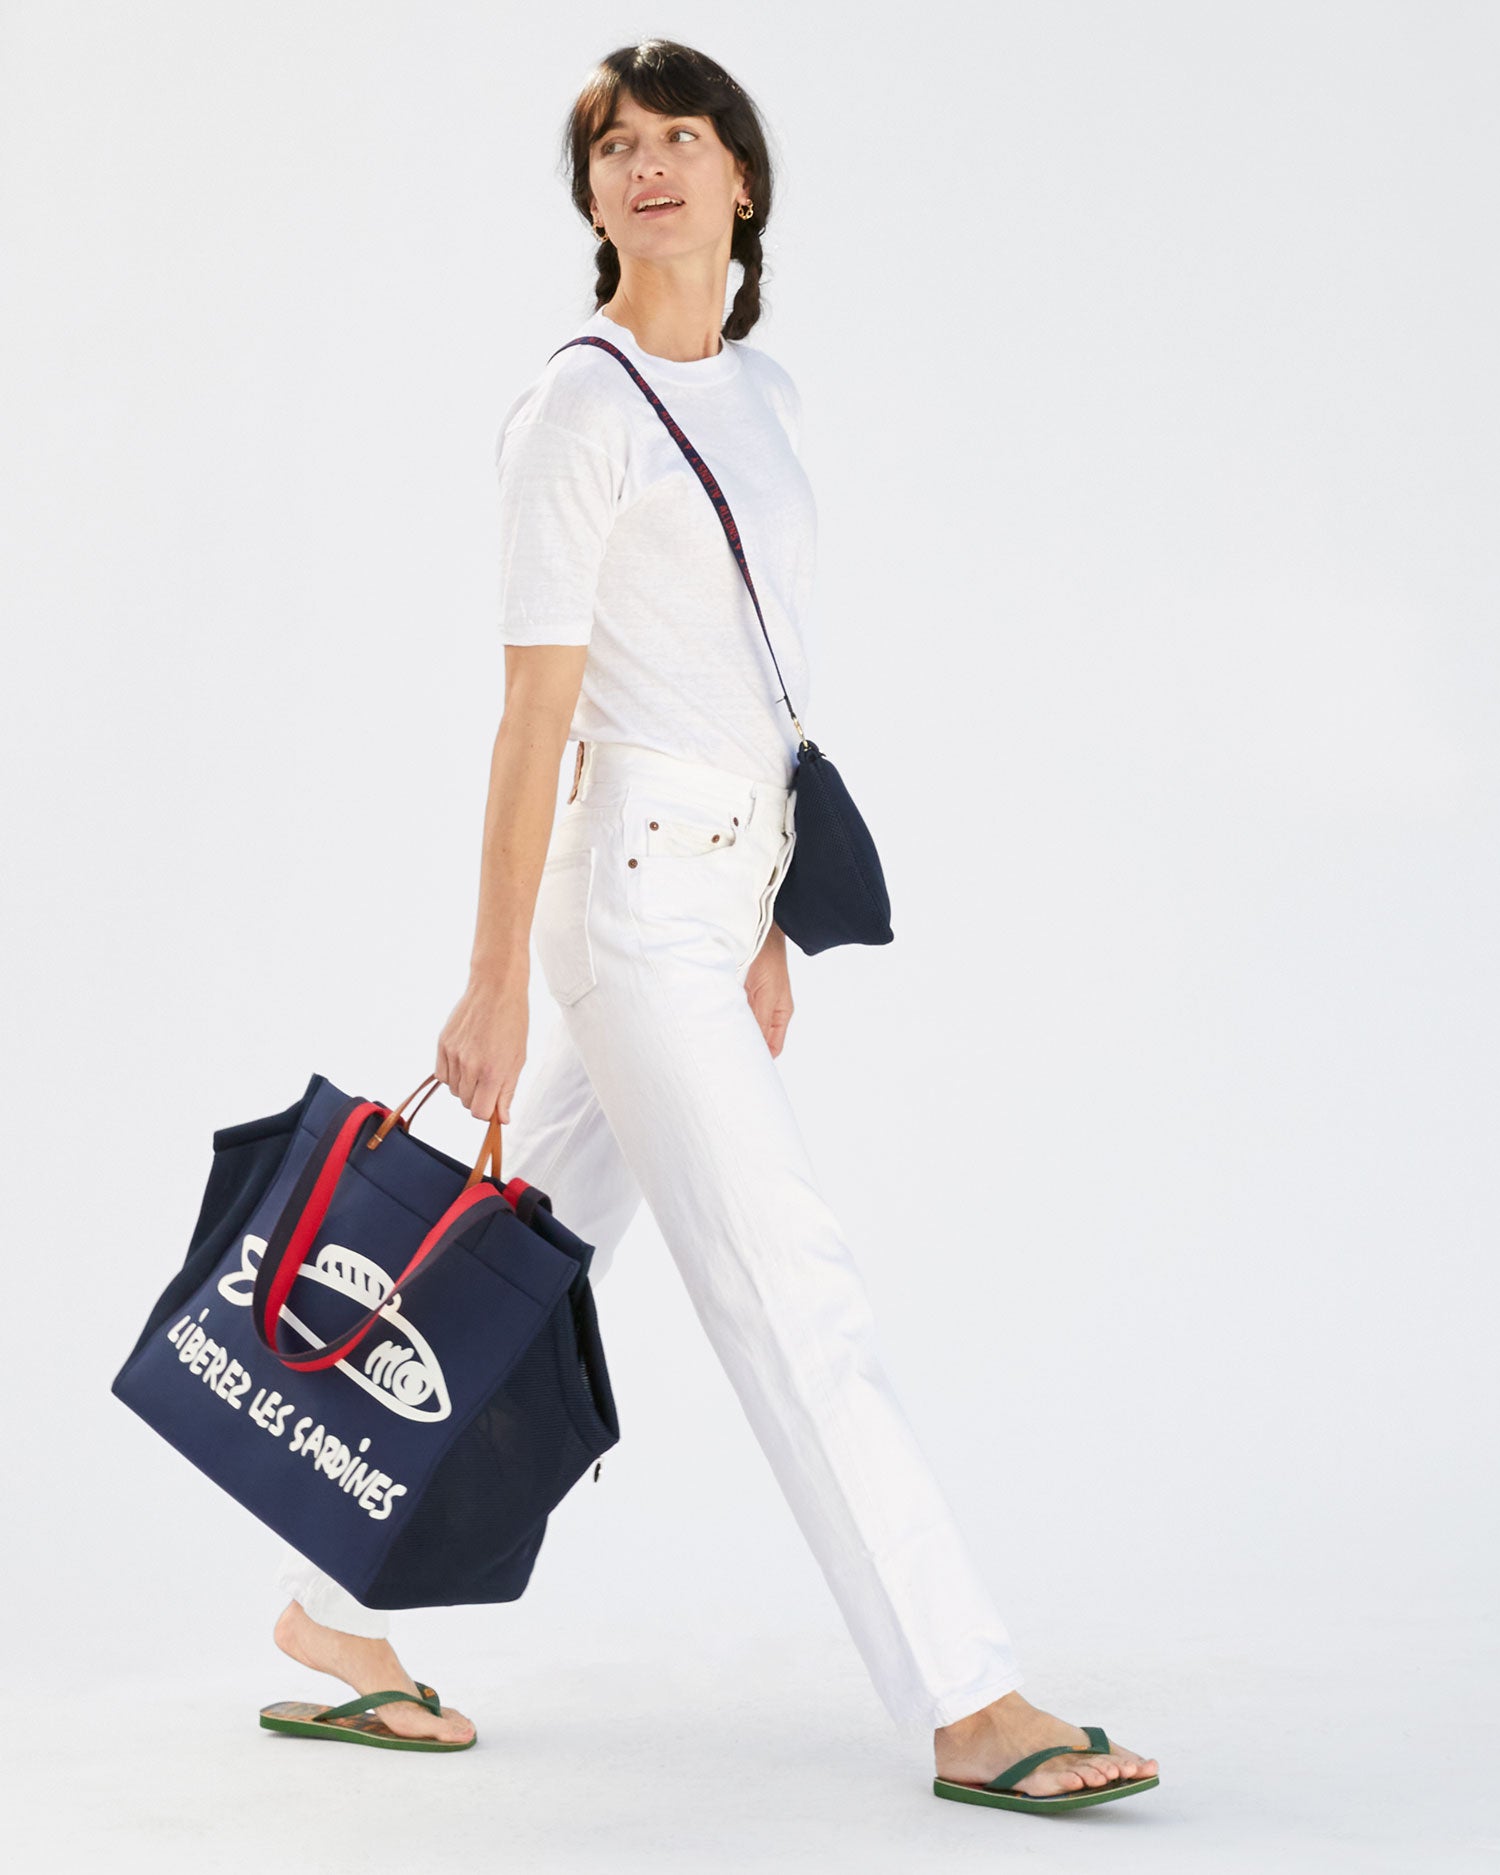 Danica wearing all white and carrying the Navy Liberez Les Sardines Trucker Beach Tote via the top handles. 